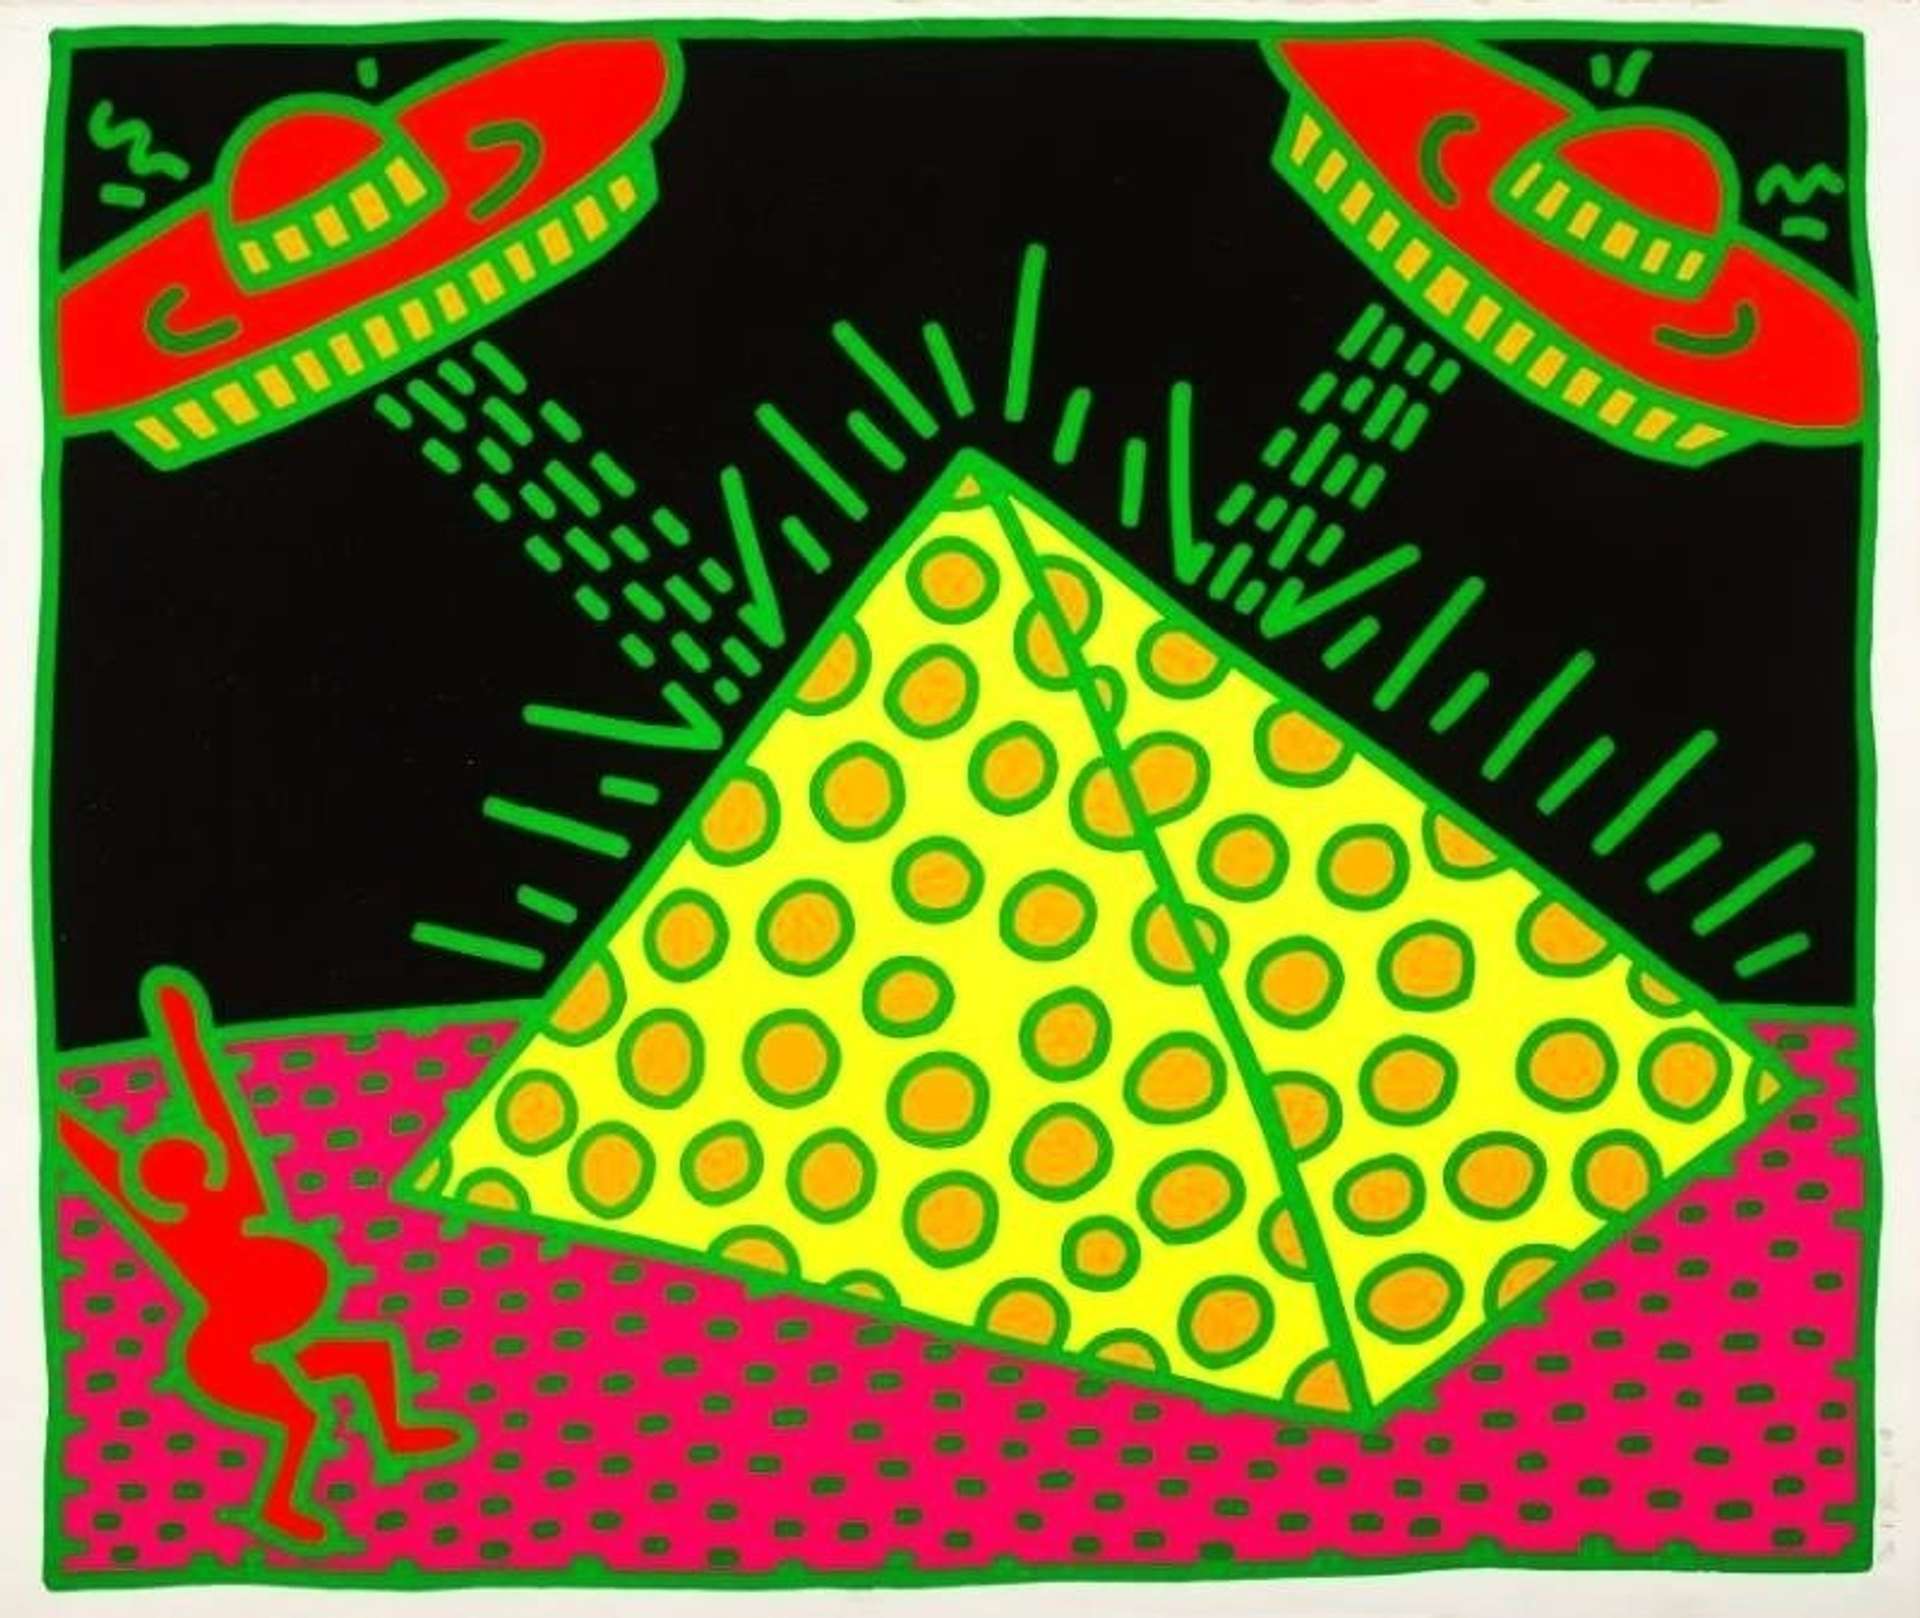 Fertility 2 by Keith Haring